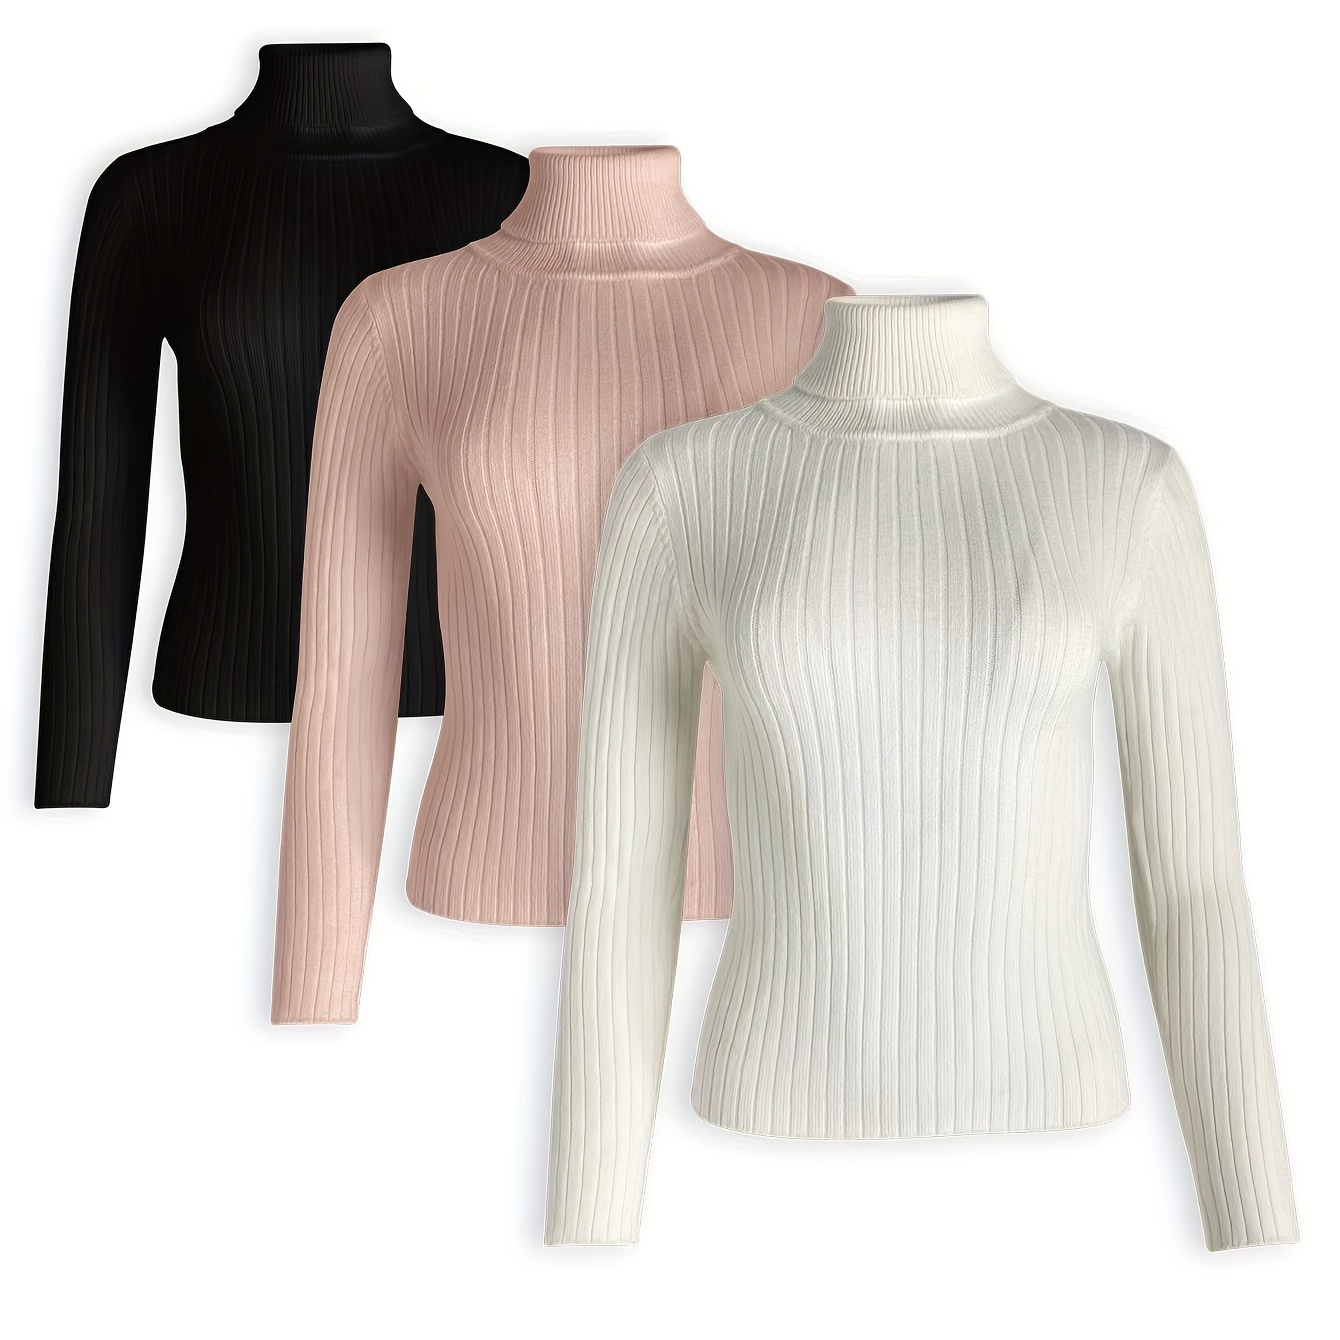 

Solid Rib Knit Pullover Sweater 3 Pack, Casual Turtle Neck Long Sleeve Slim Sweater, Women's Clothing